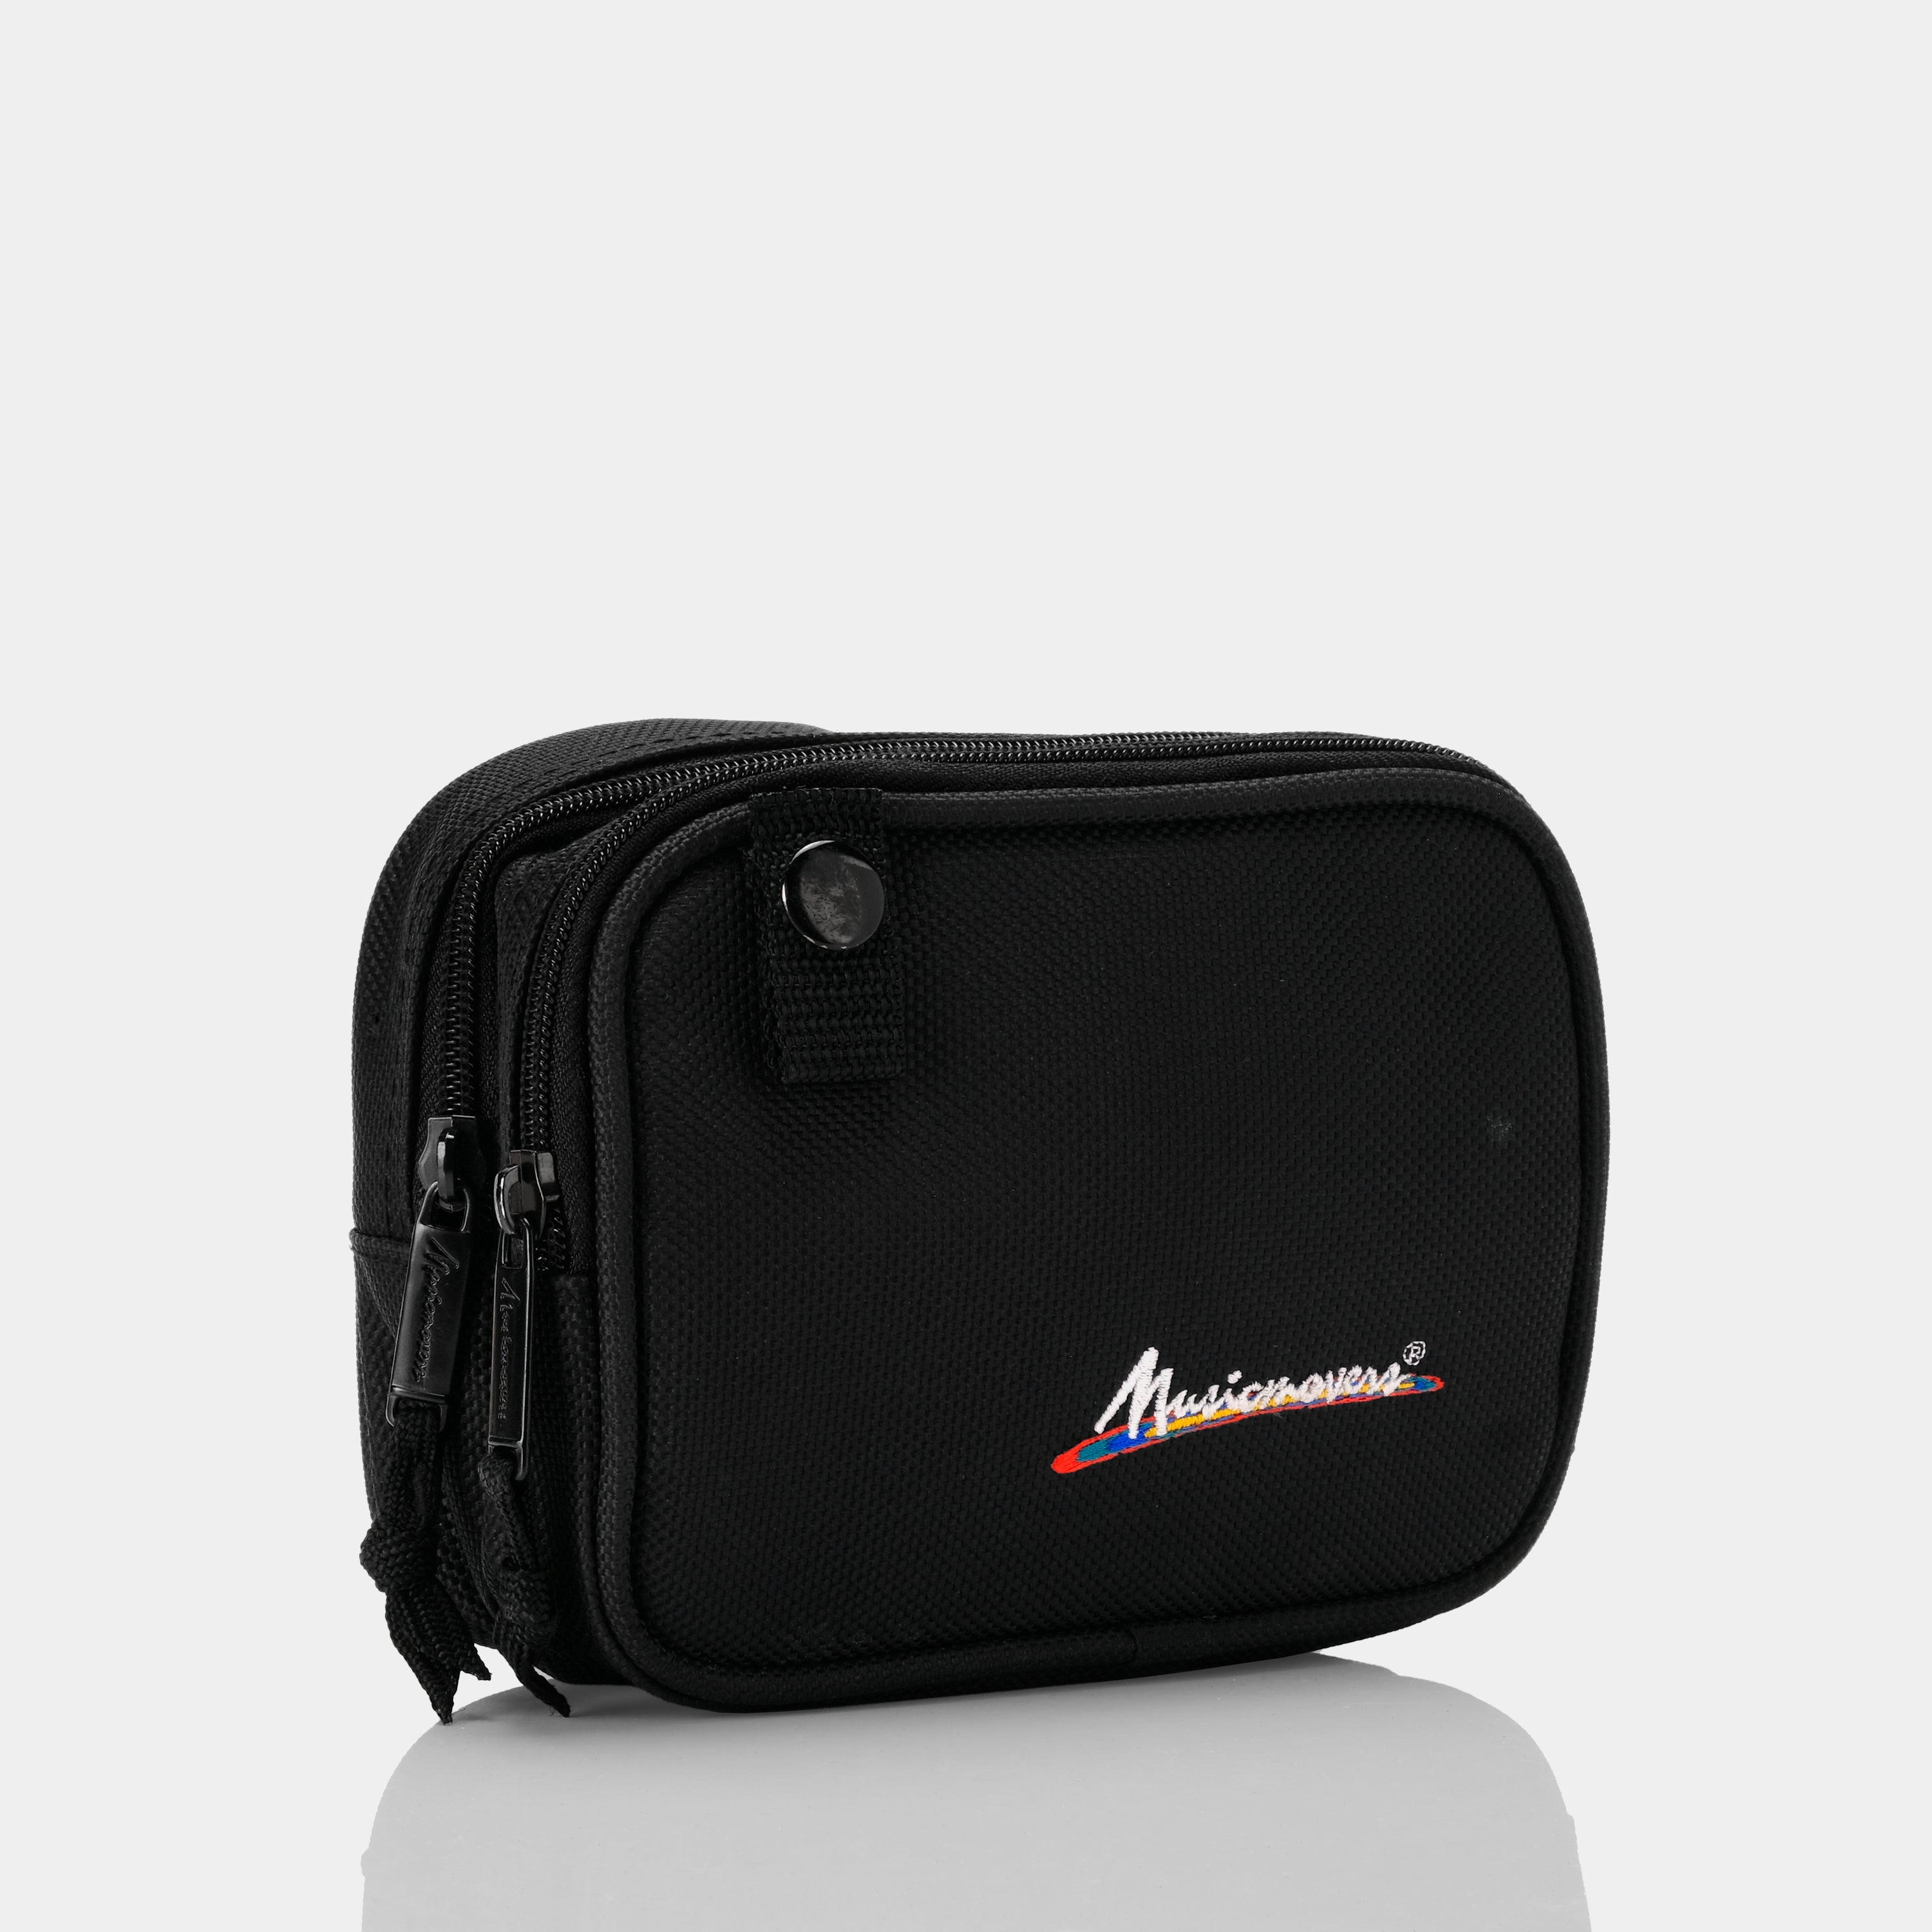 Musicmovers Cassette Player Storage Bag